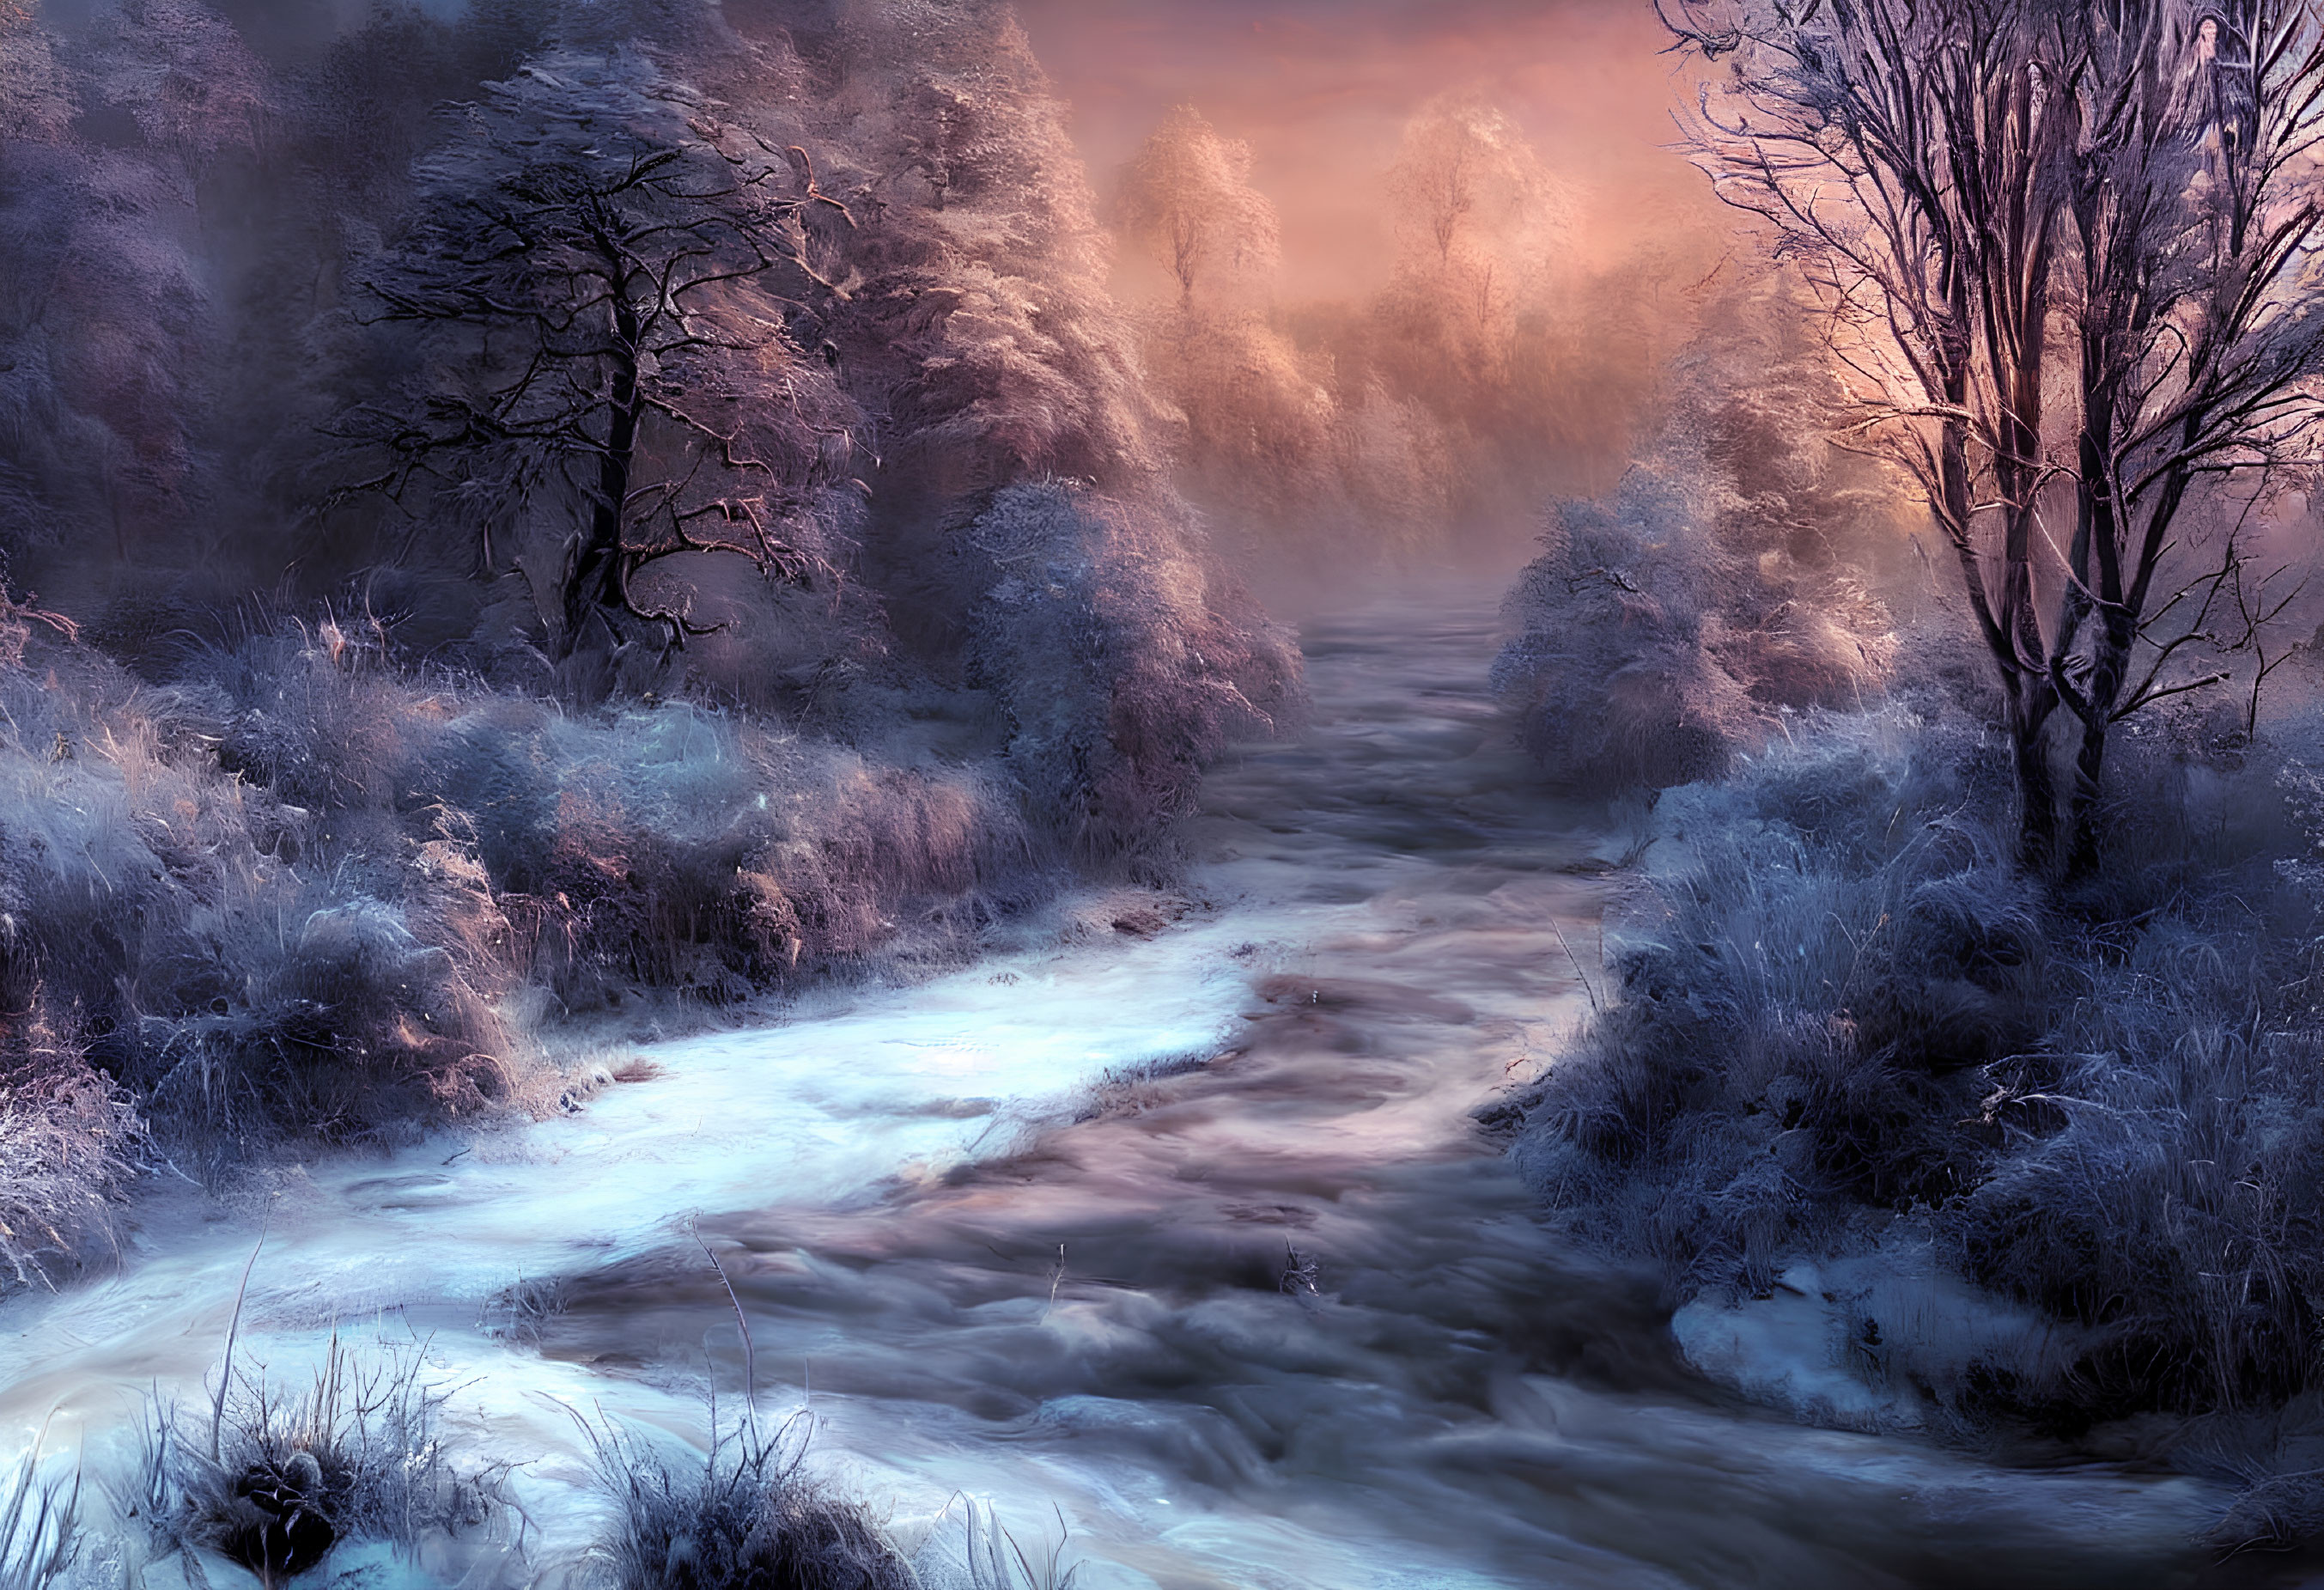 Surreal winter landscape: flowing river, snow-covered grounds, frost-laden trees